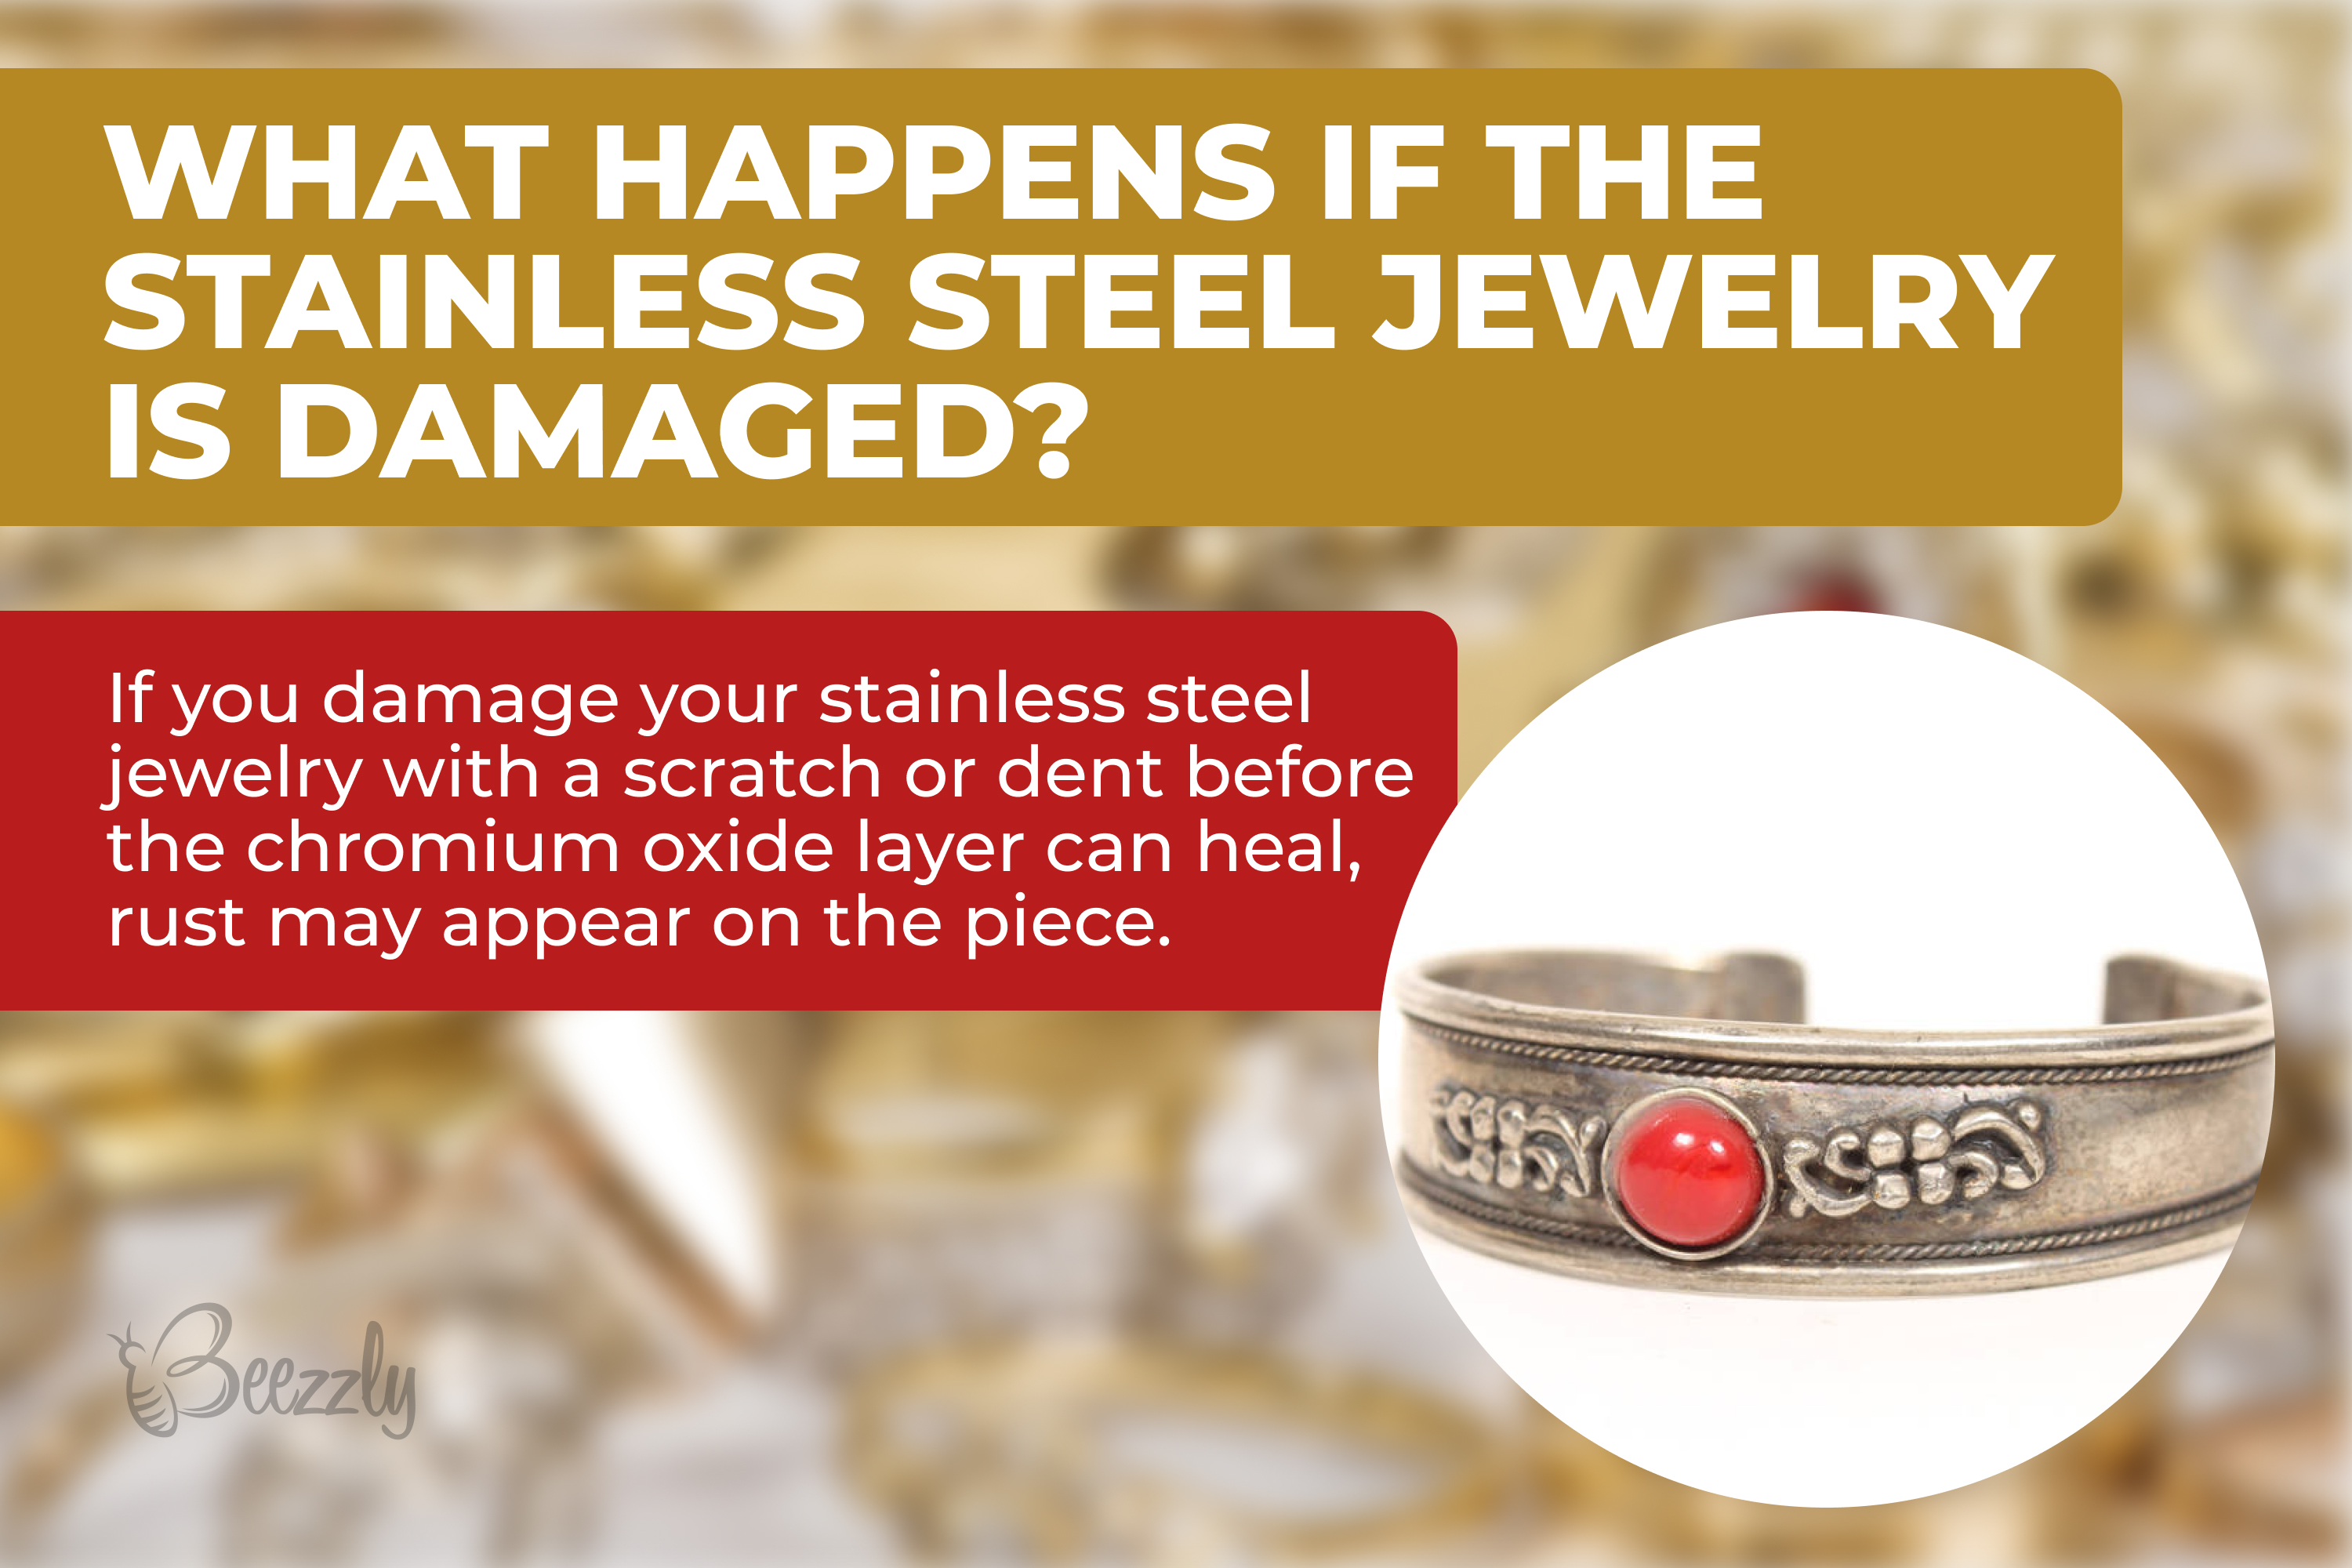 What happens if the stainless steel jewelry is damaged